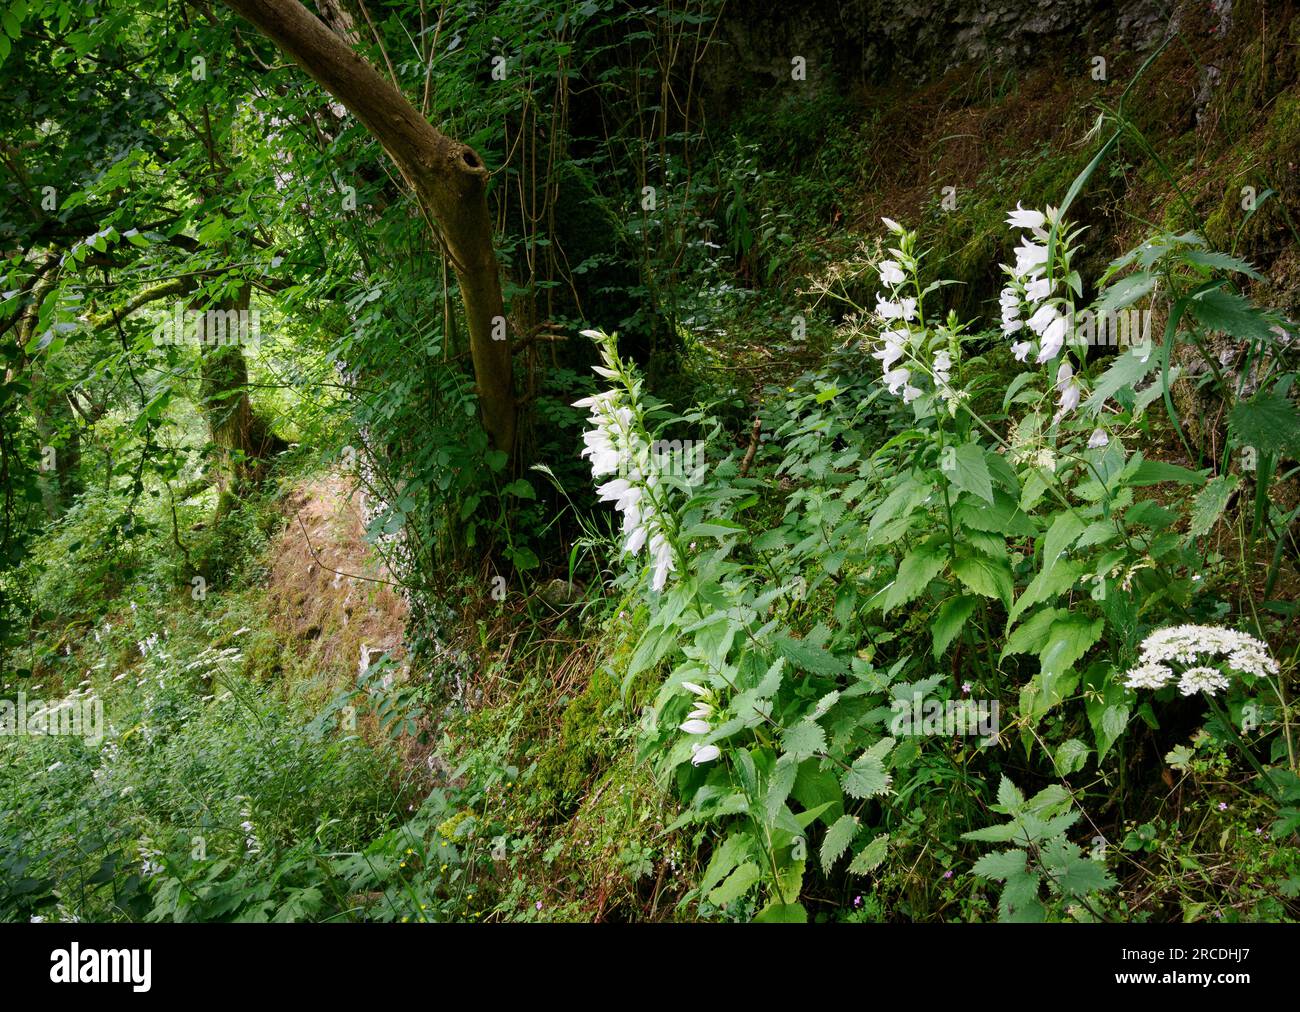 White form of Giant Bellflower Campanula latifolia growing on the steep wooded slopes of Cales dale above the River Lathkill in Derbyshire UK Stock Photo